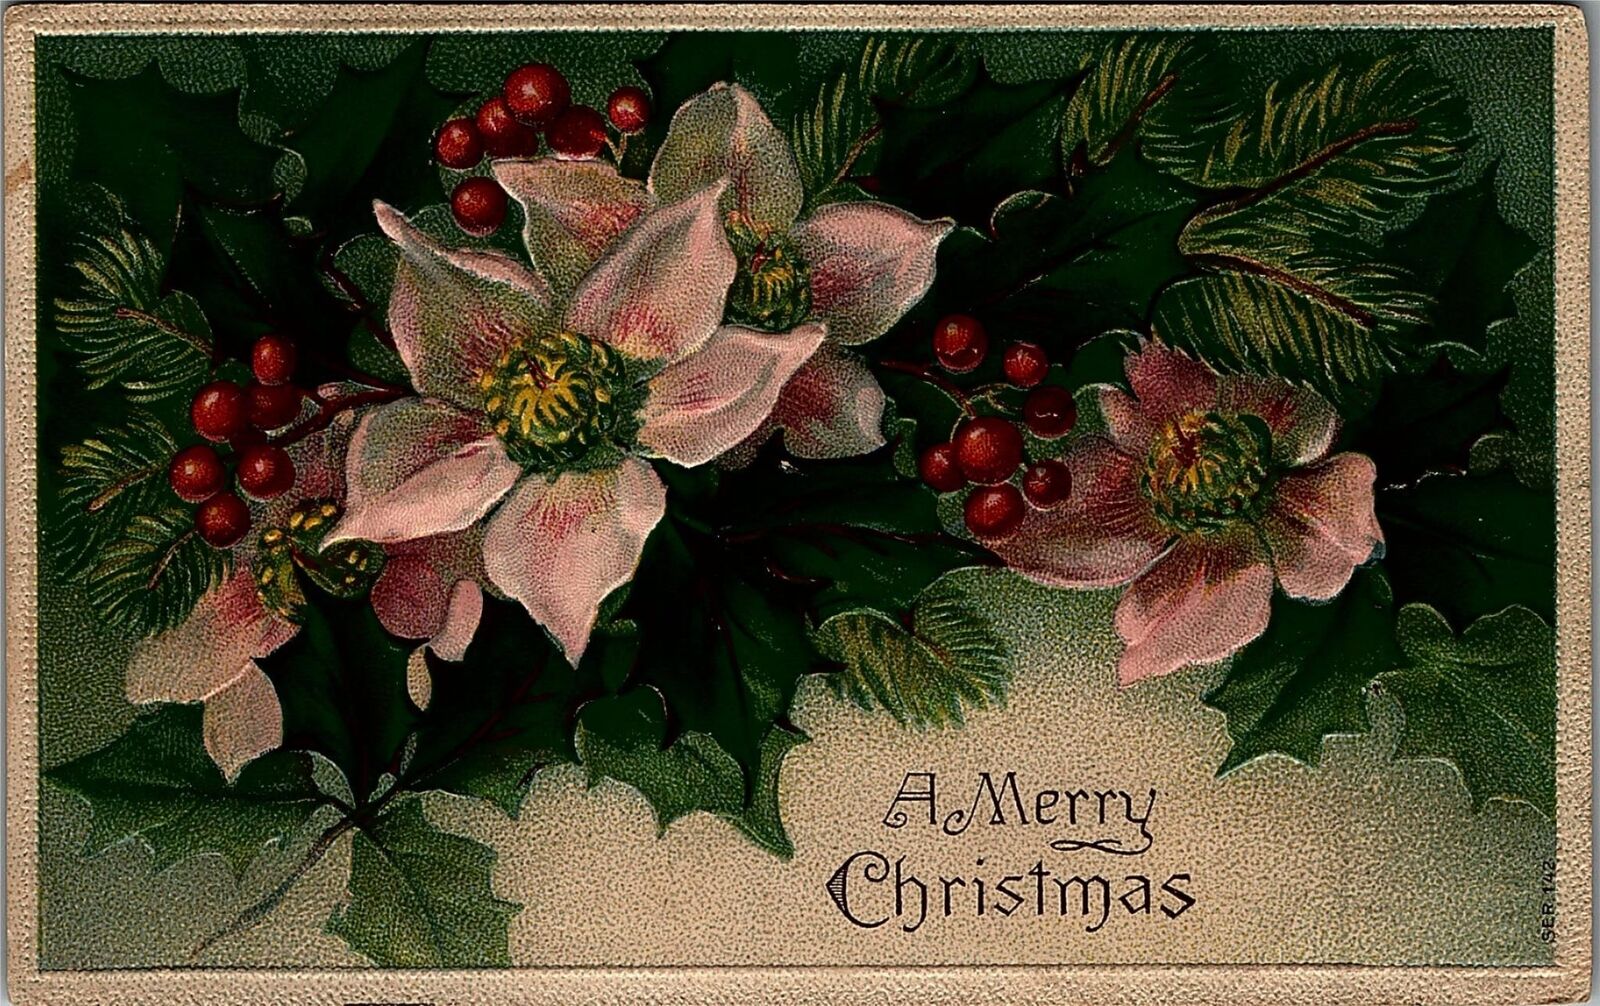 c1907 MERRY CHRISTMAS PHELPS PA FLORAL HOLLY PINE HEAVY EMBOSSED POSTCARD 20-113